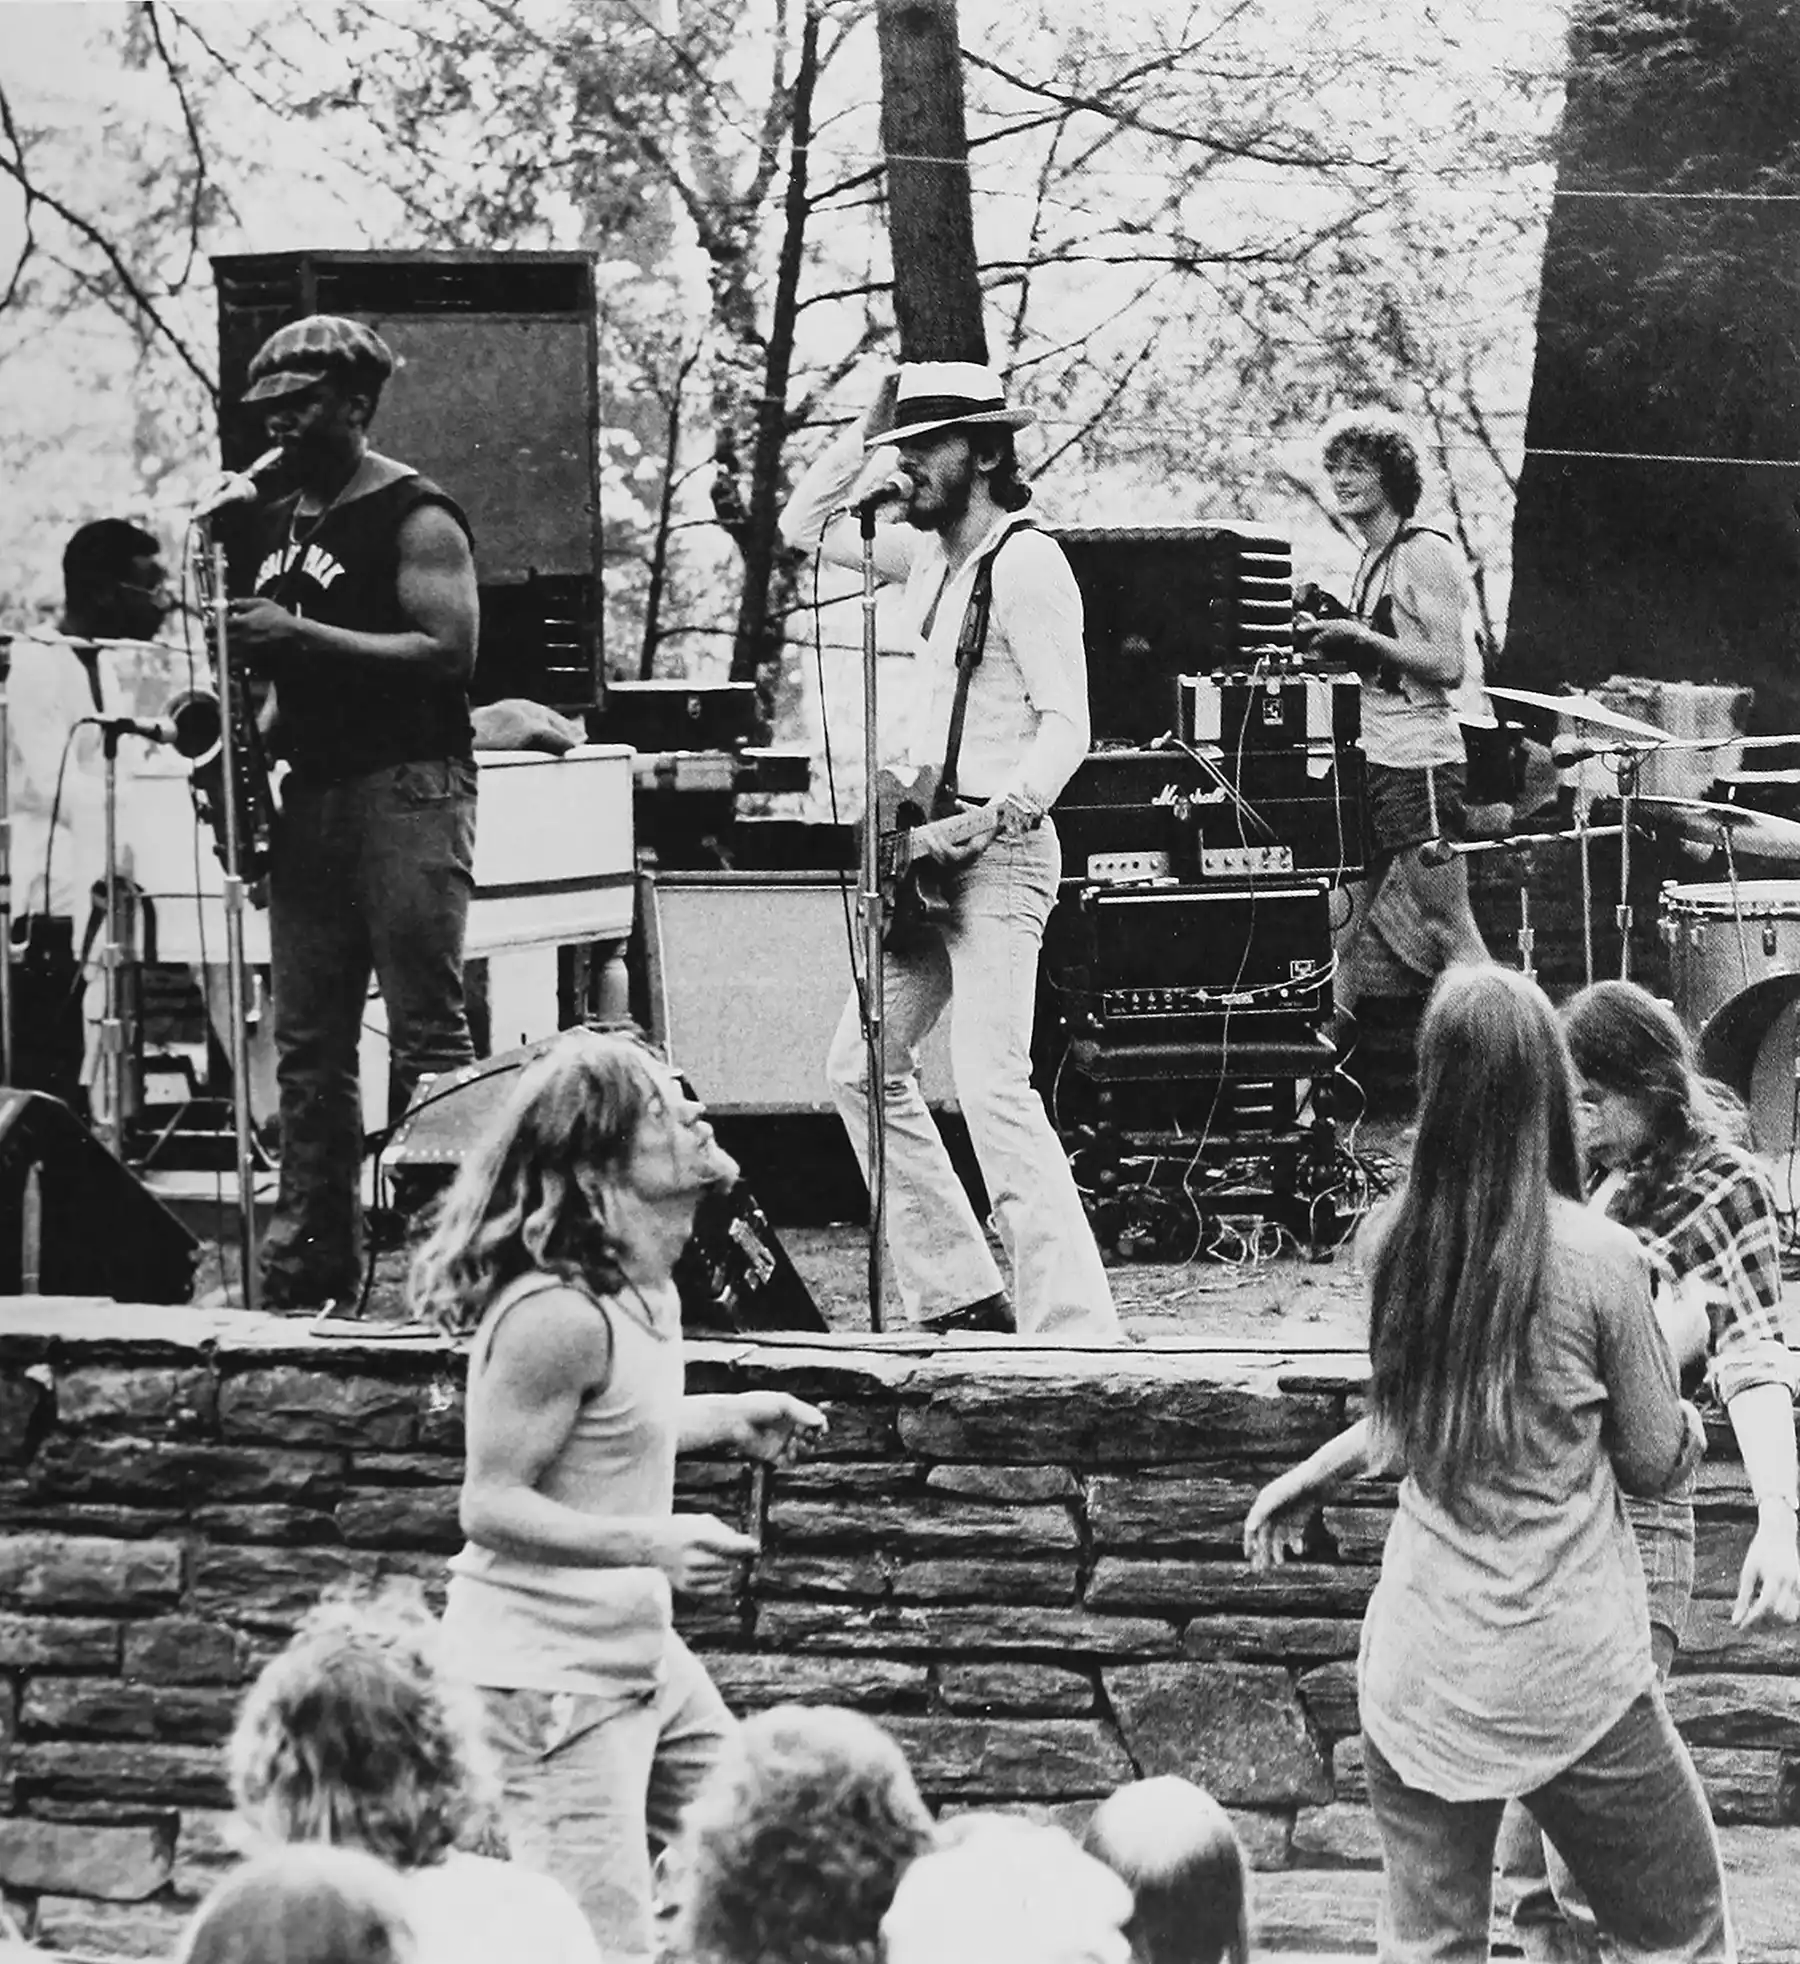 Bruce Springsteen center stage in a black and white photo, Black and white image of Bruce Springsteen and the E-Street Band performing in the Scott Outdoor Amphitheater in 1974. Students dance in front of the stage.